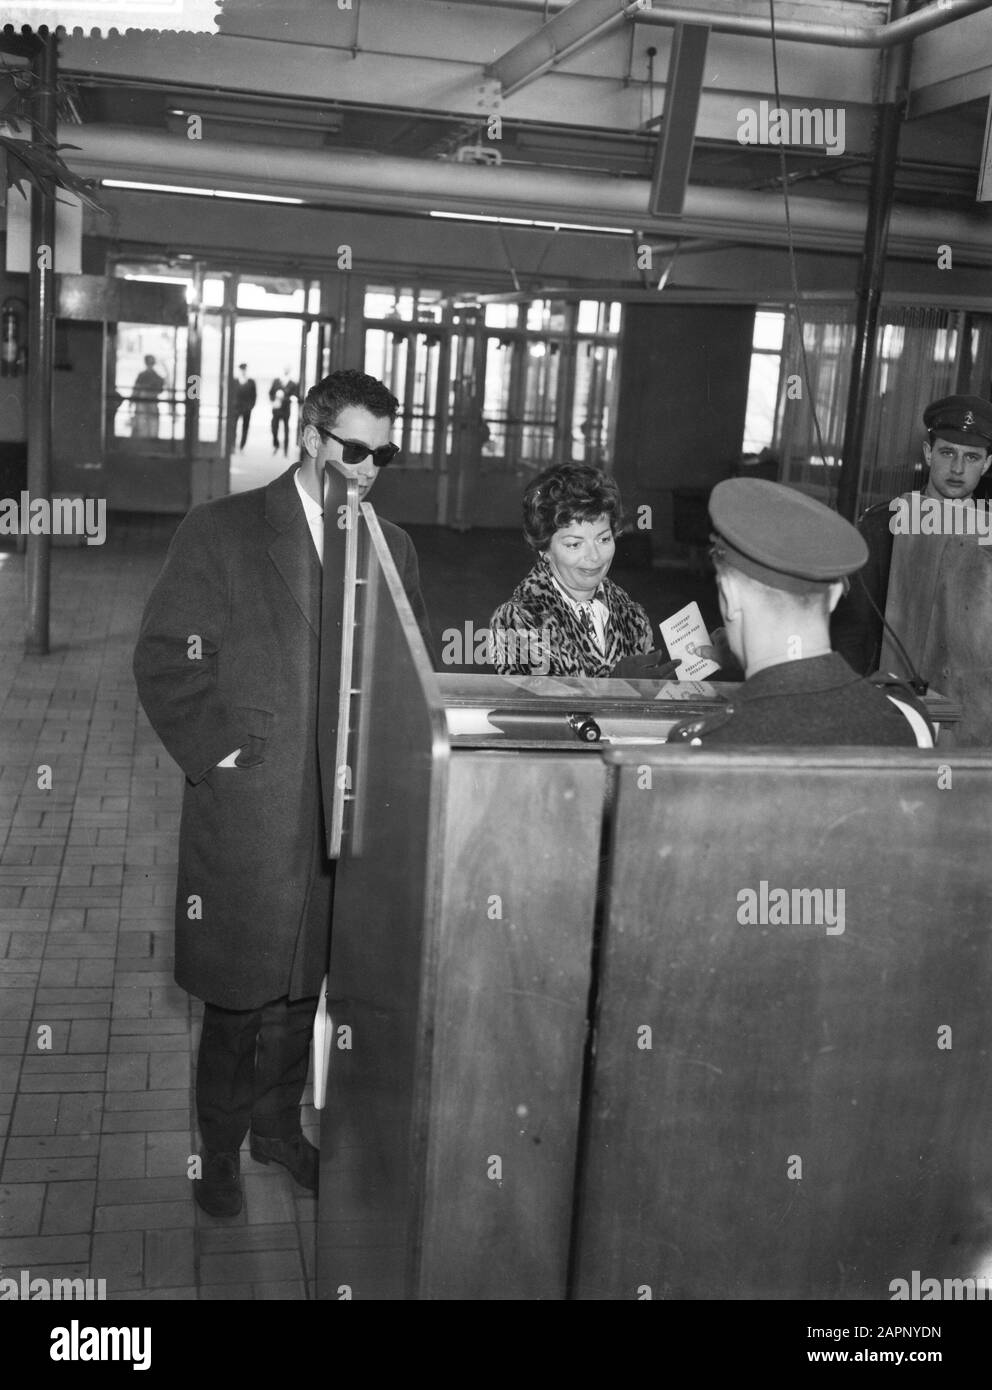 Song Contest 1958  Lys Assia (Switzerland) at the parpoort control at Schiphol Date: 11 March 1958 Location: Noord-Holland, Schiphol Keywords: arrivals, artists, music, song festivals, airports Personal name: Assia, Lys Stock Photo